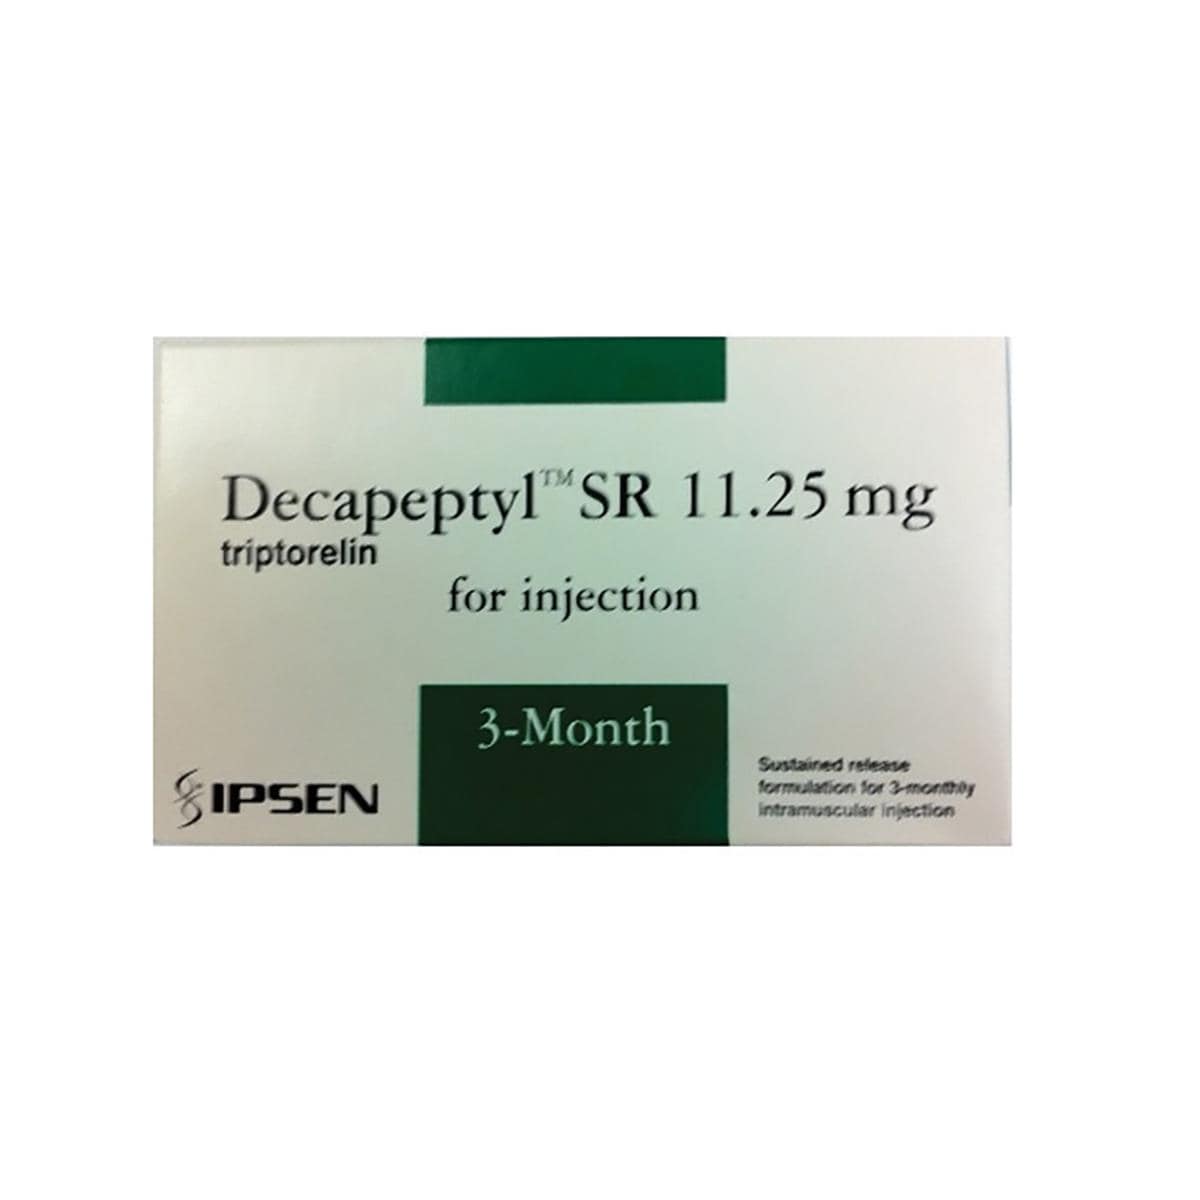 Decapeptyl 11.25mg Vial